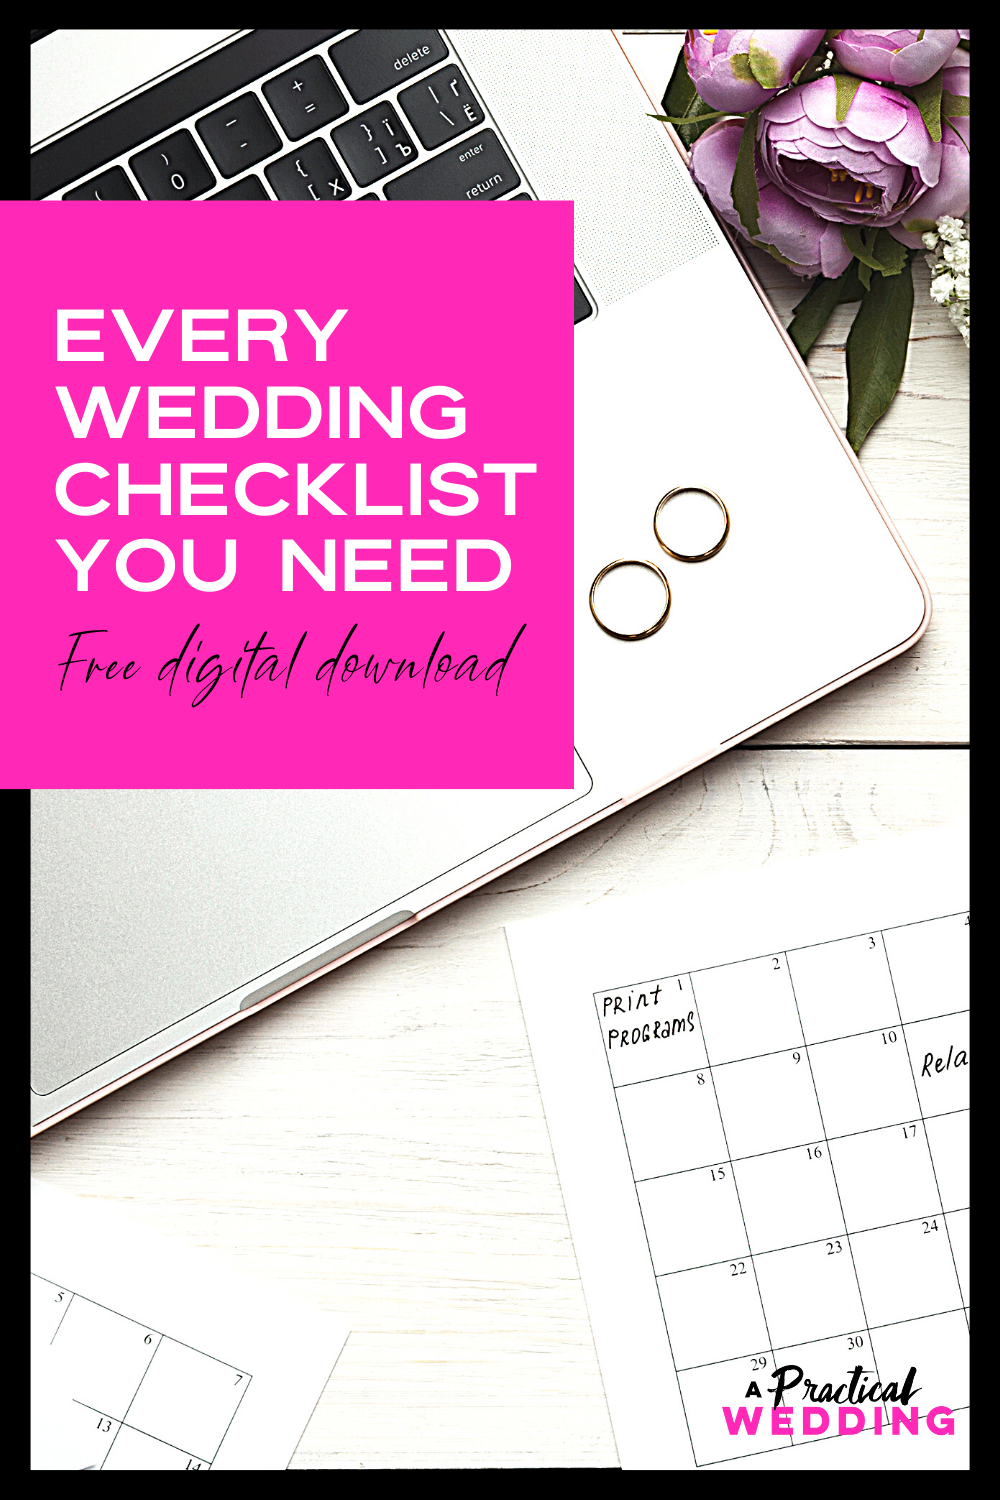 Every wedding checklist you need graphic